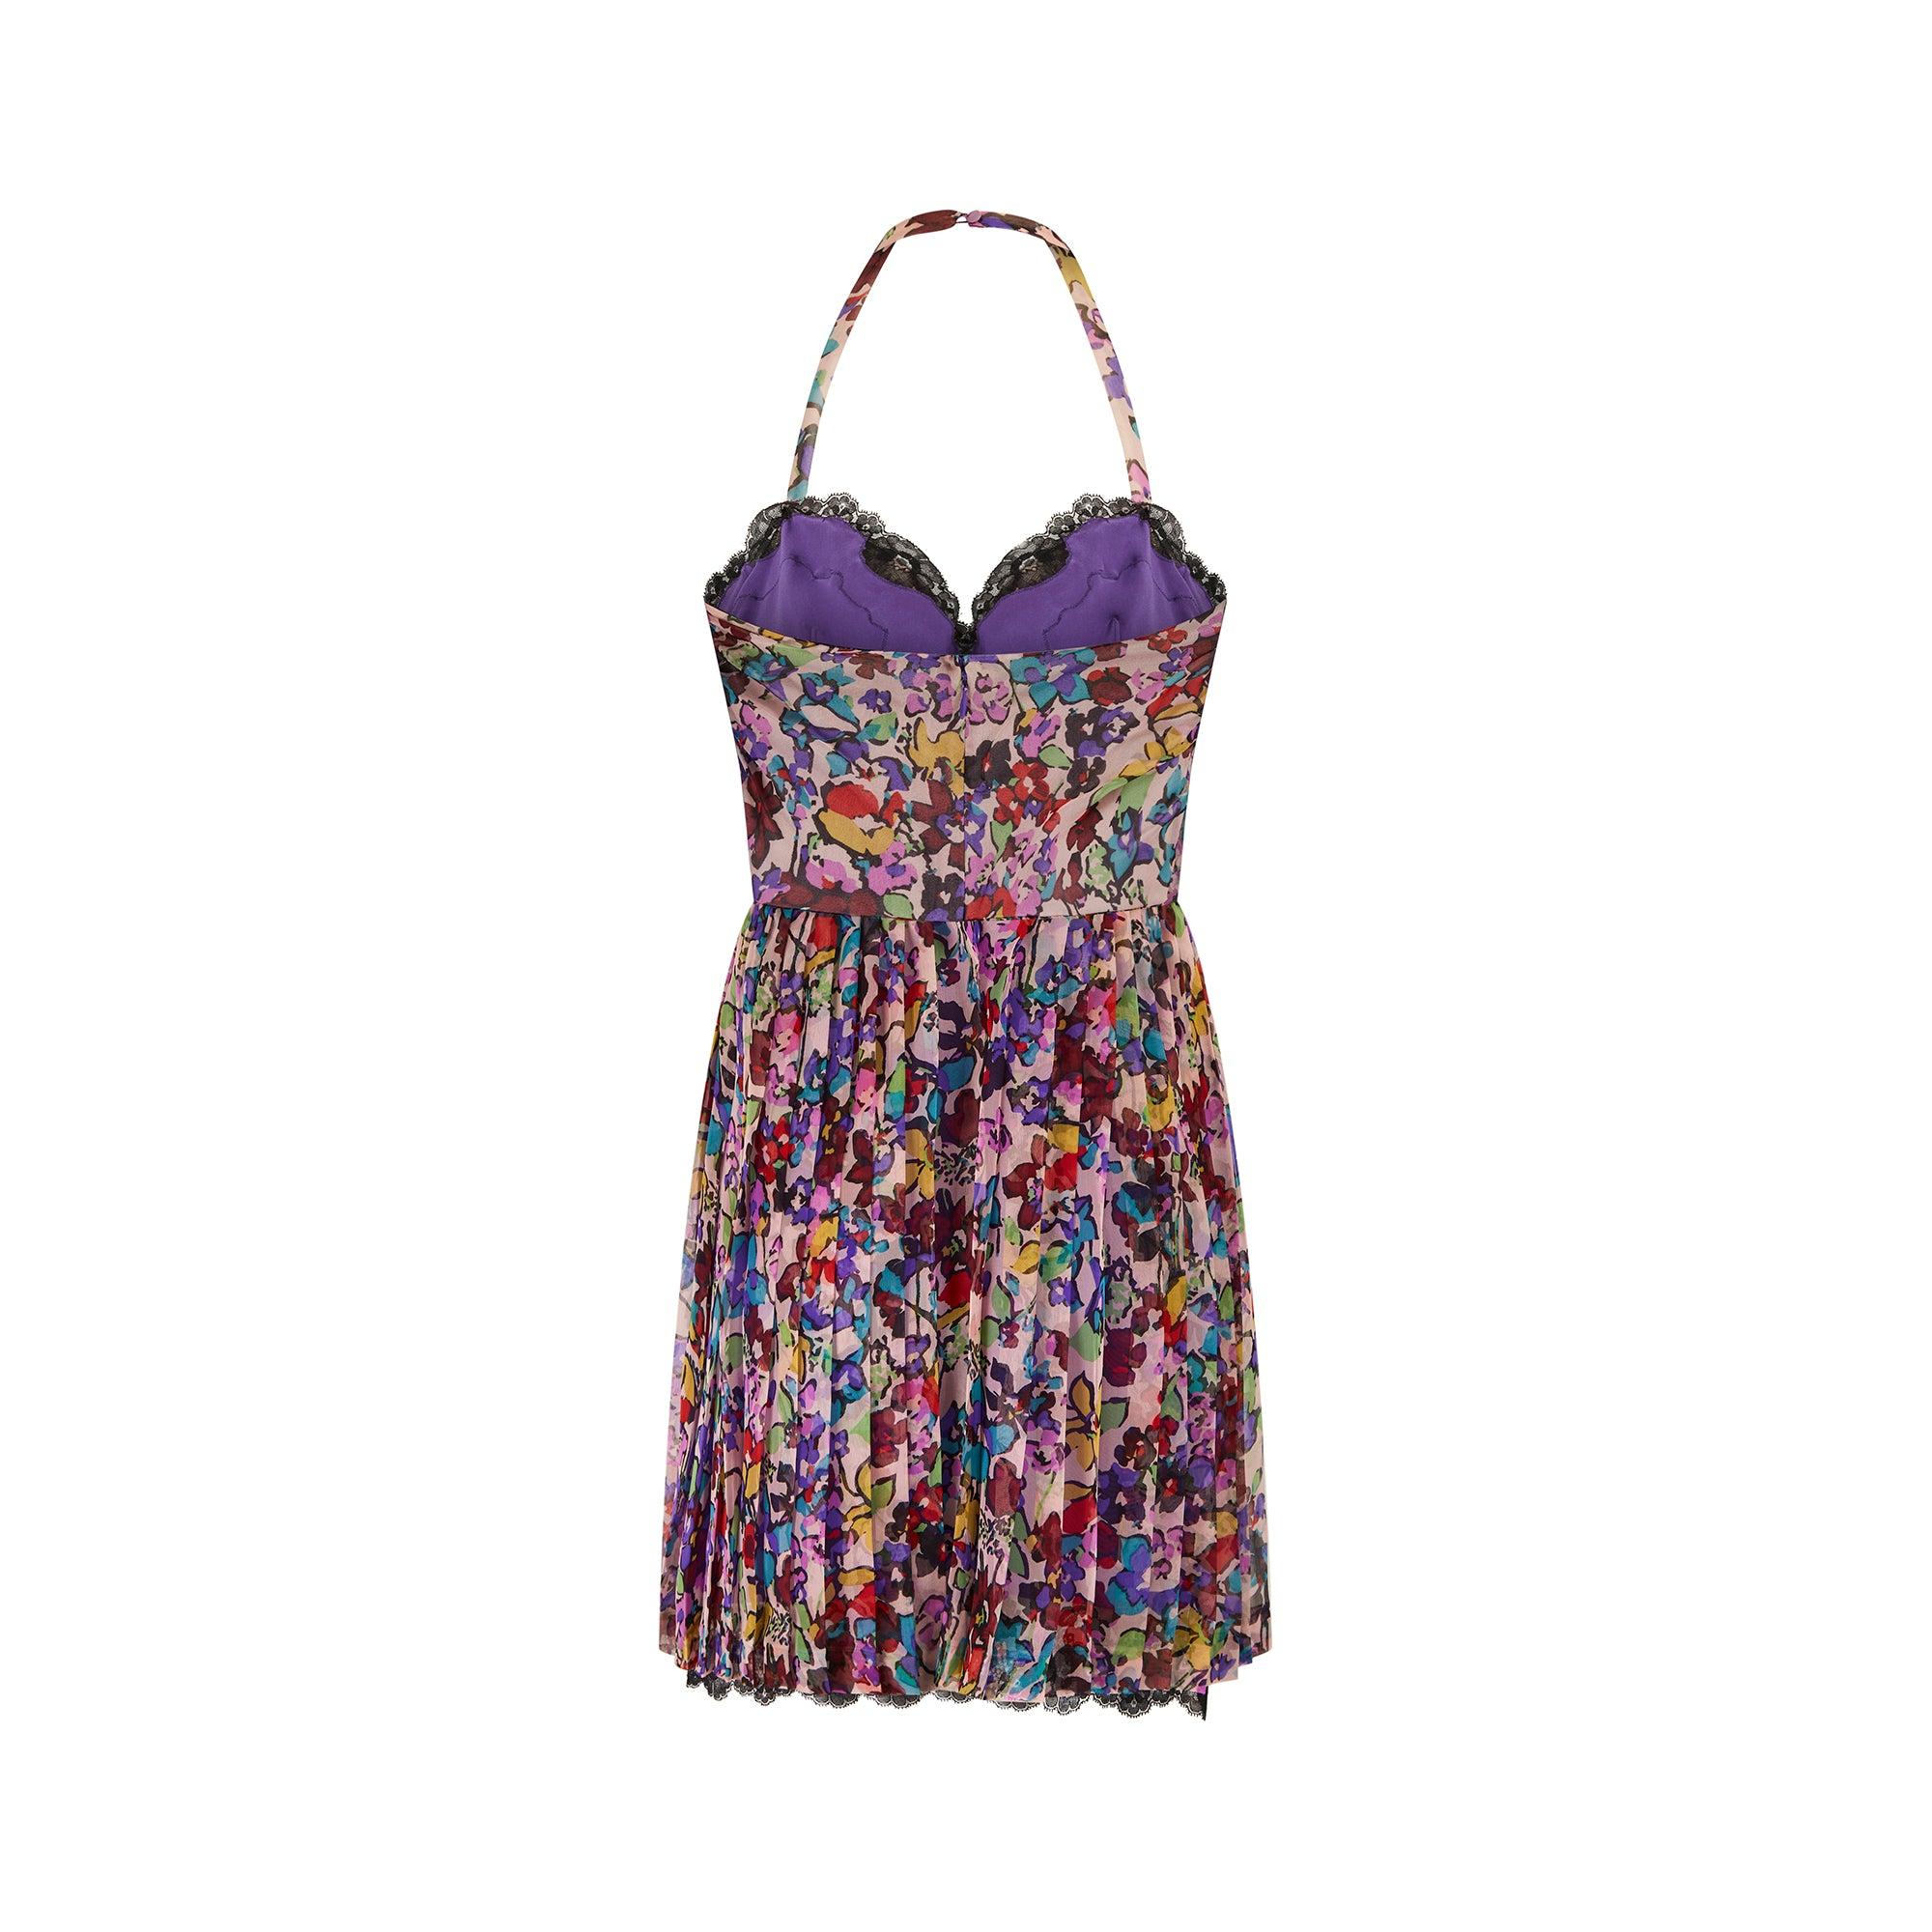 2010 Runway Christian Dior Floral Silk Chiffon Pleated Dress In Excellent Condition For Sale In London, GB